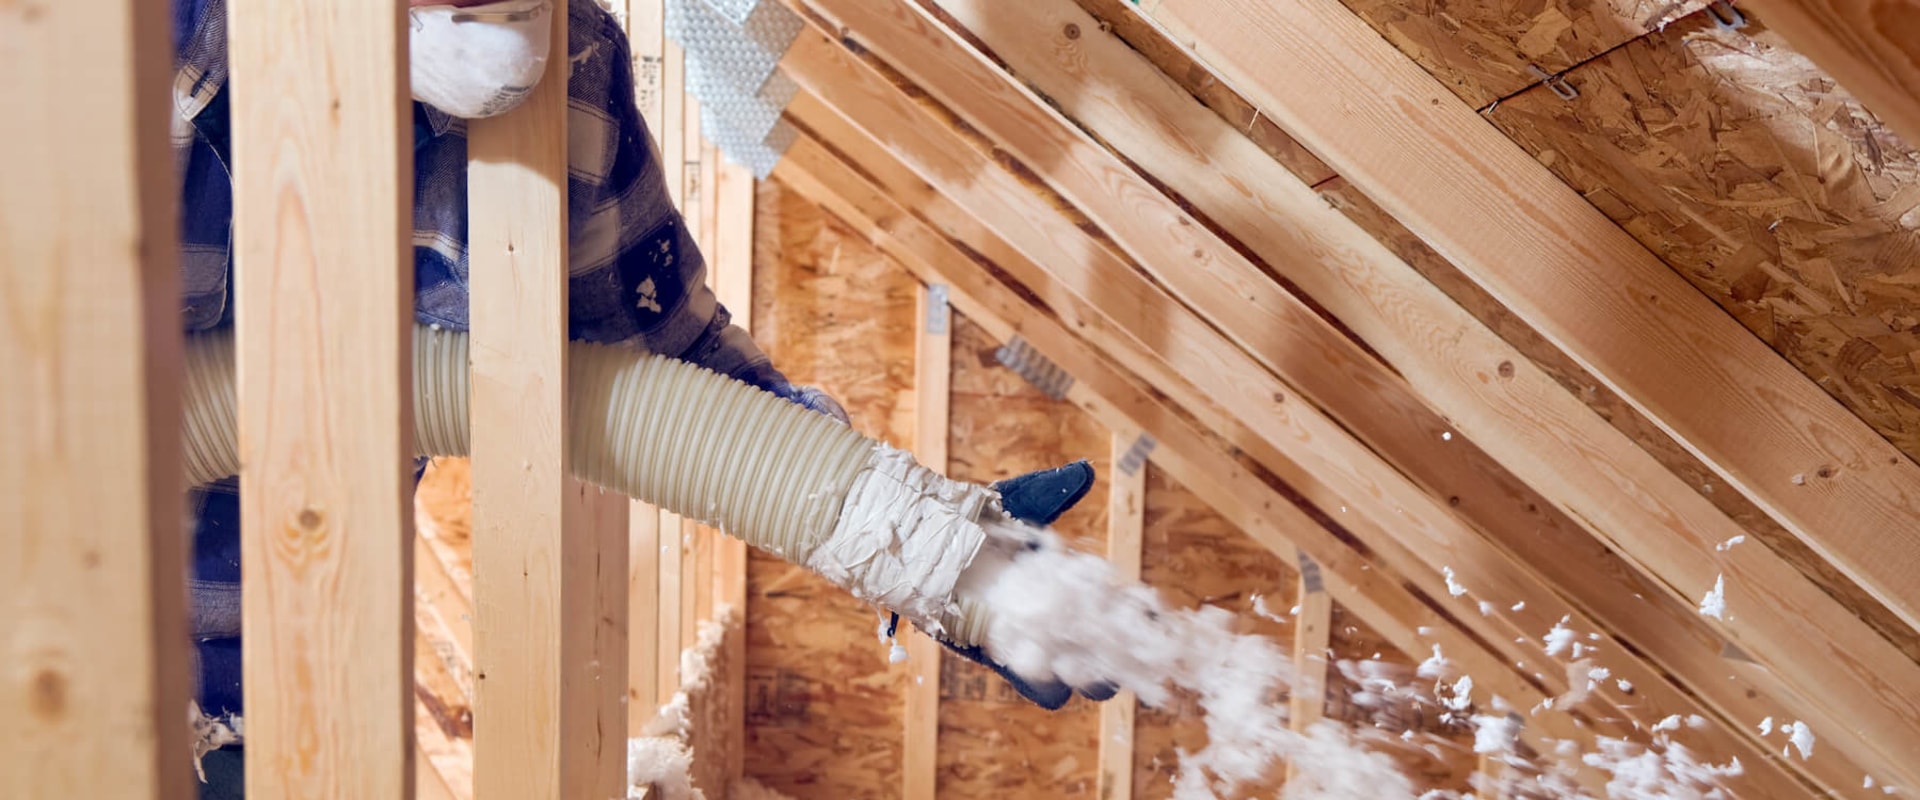 Enhance Home Value With Attic Insulation Installation Service